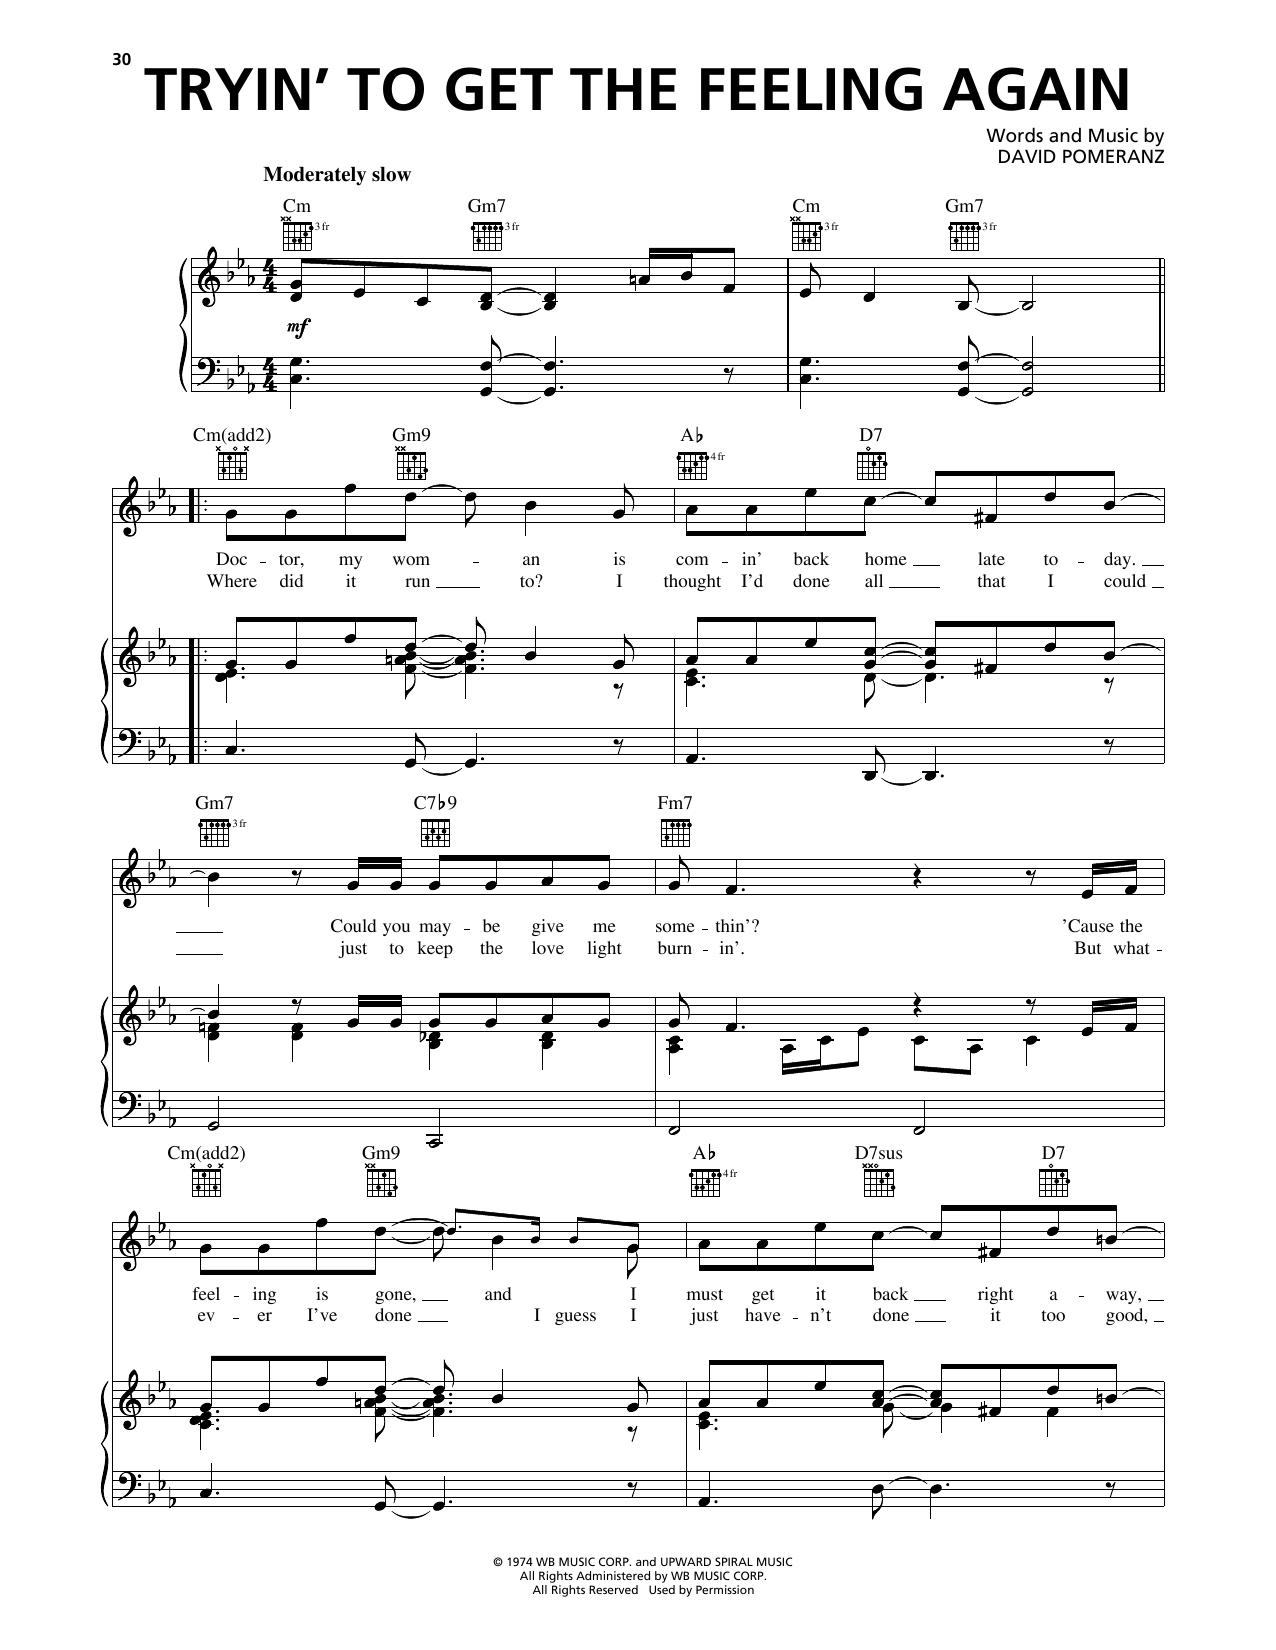 Download Barry Manilow Tryin' To Get The Feeling Again Sheet Music